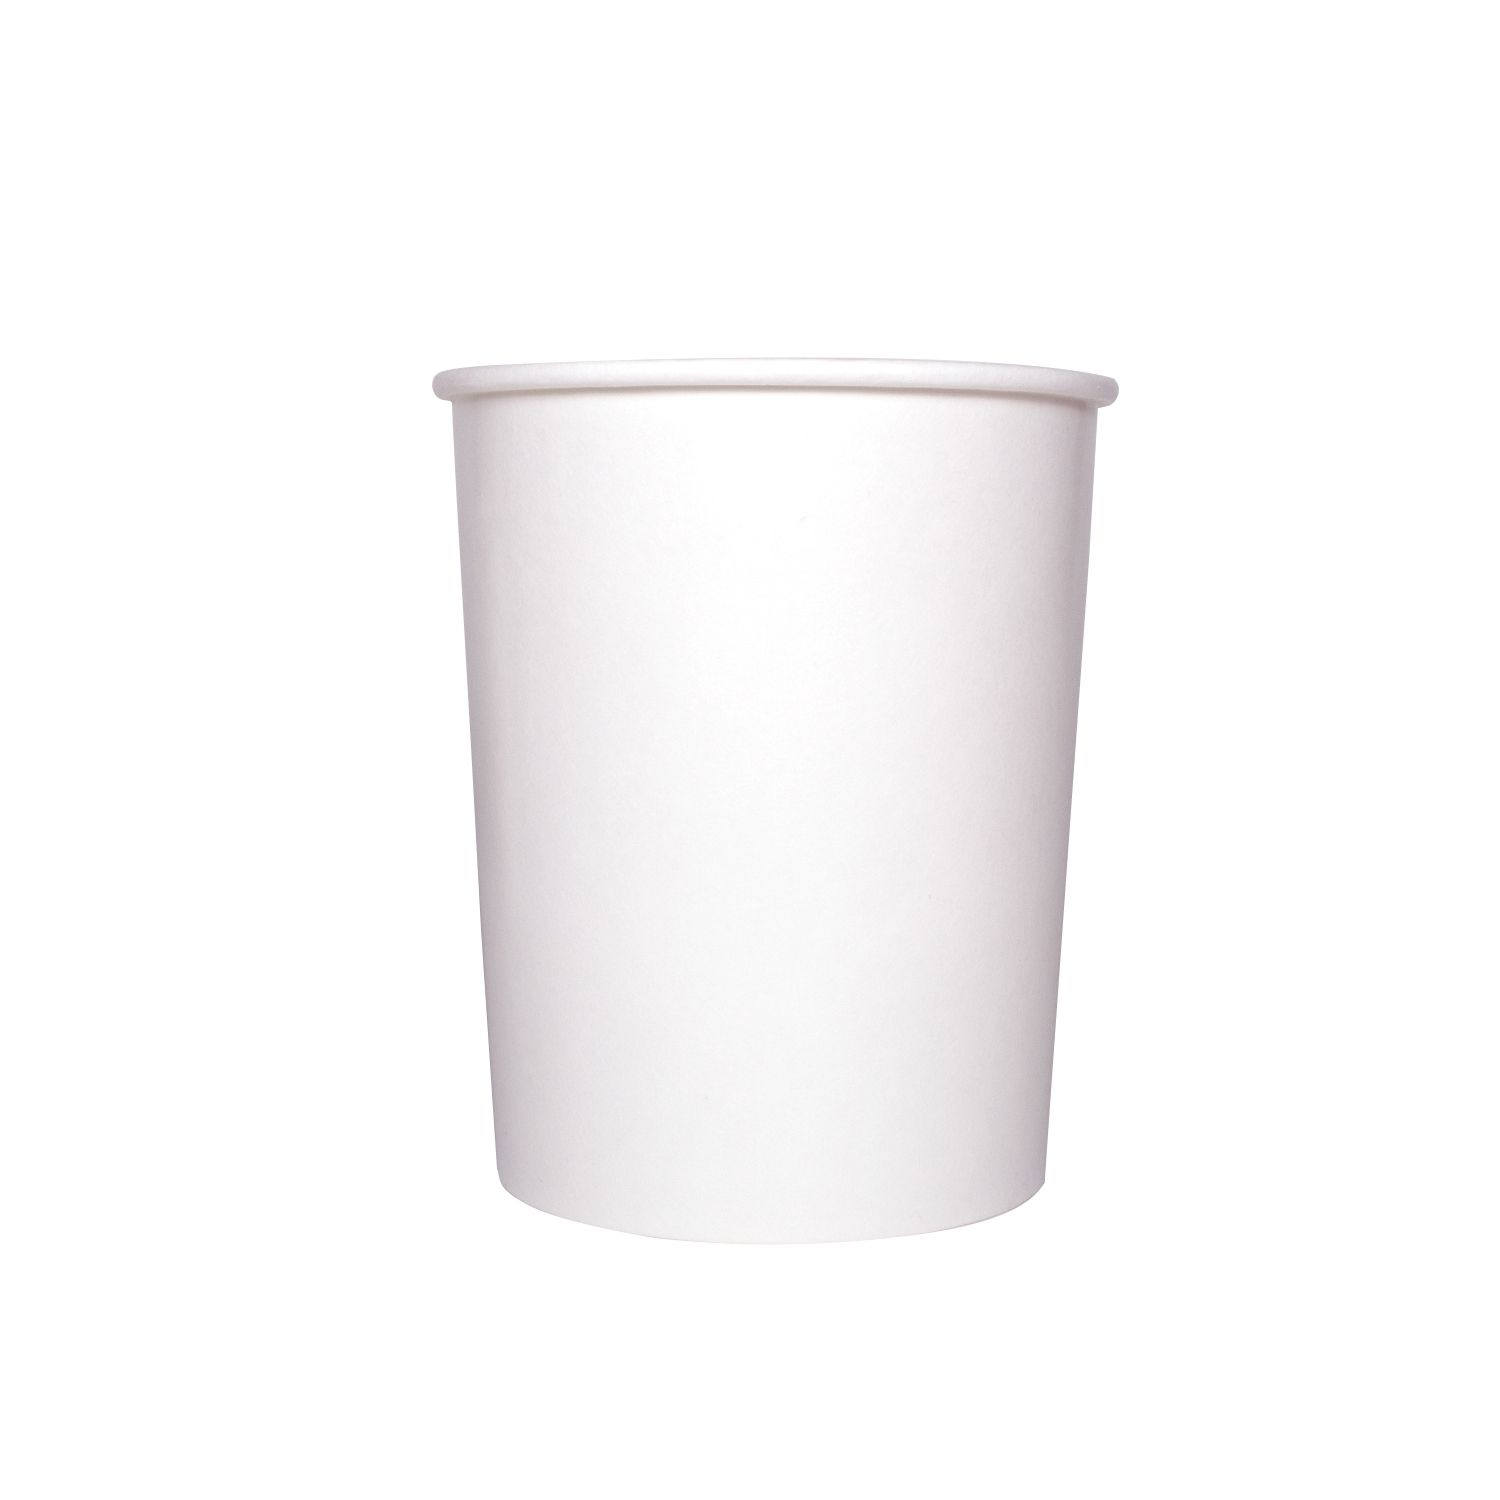 32 oz White Paper Hot Food Container